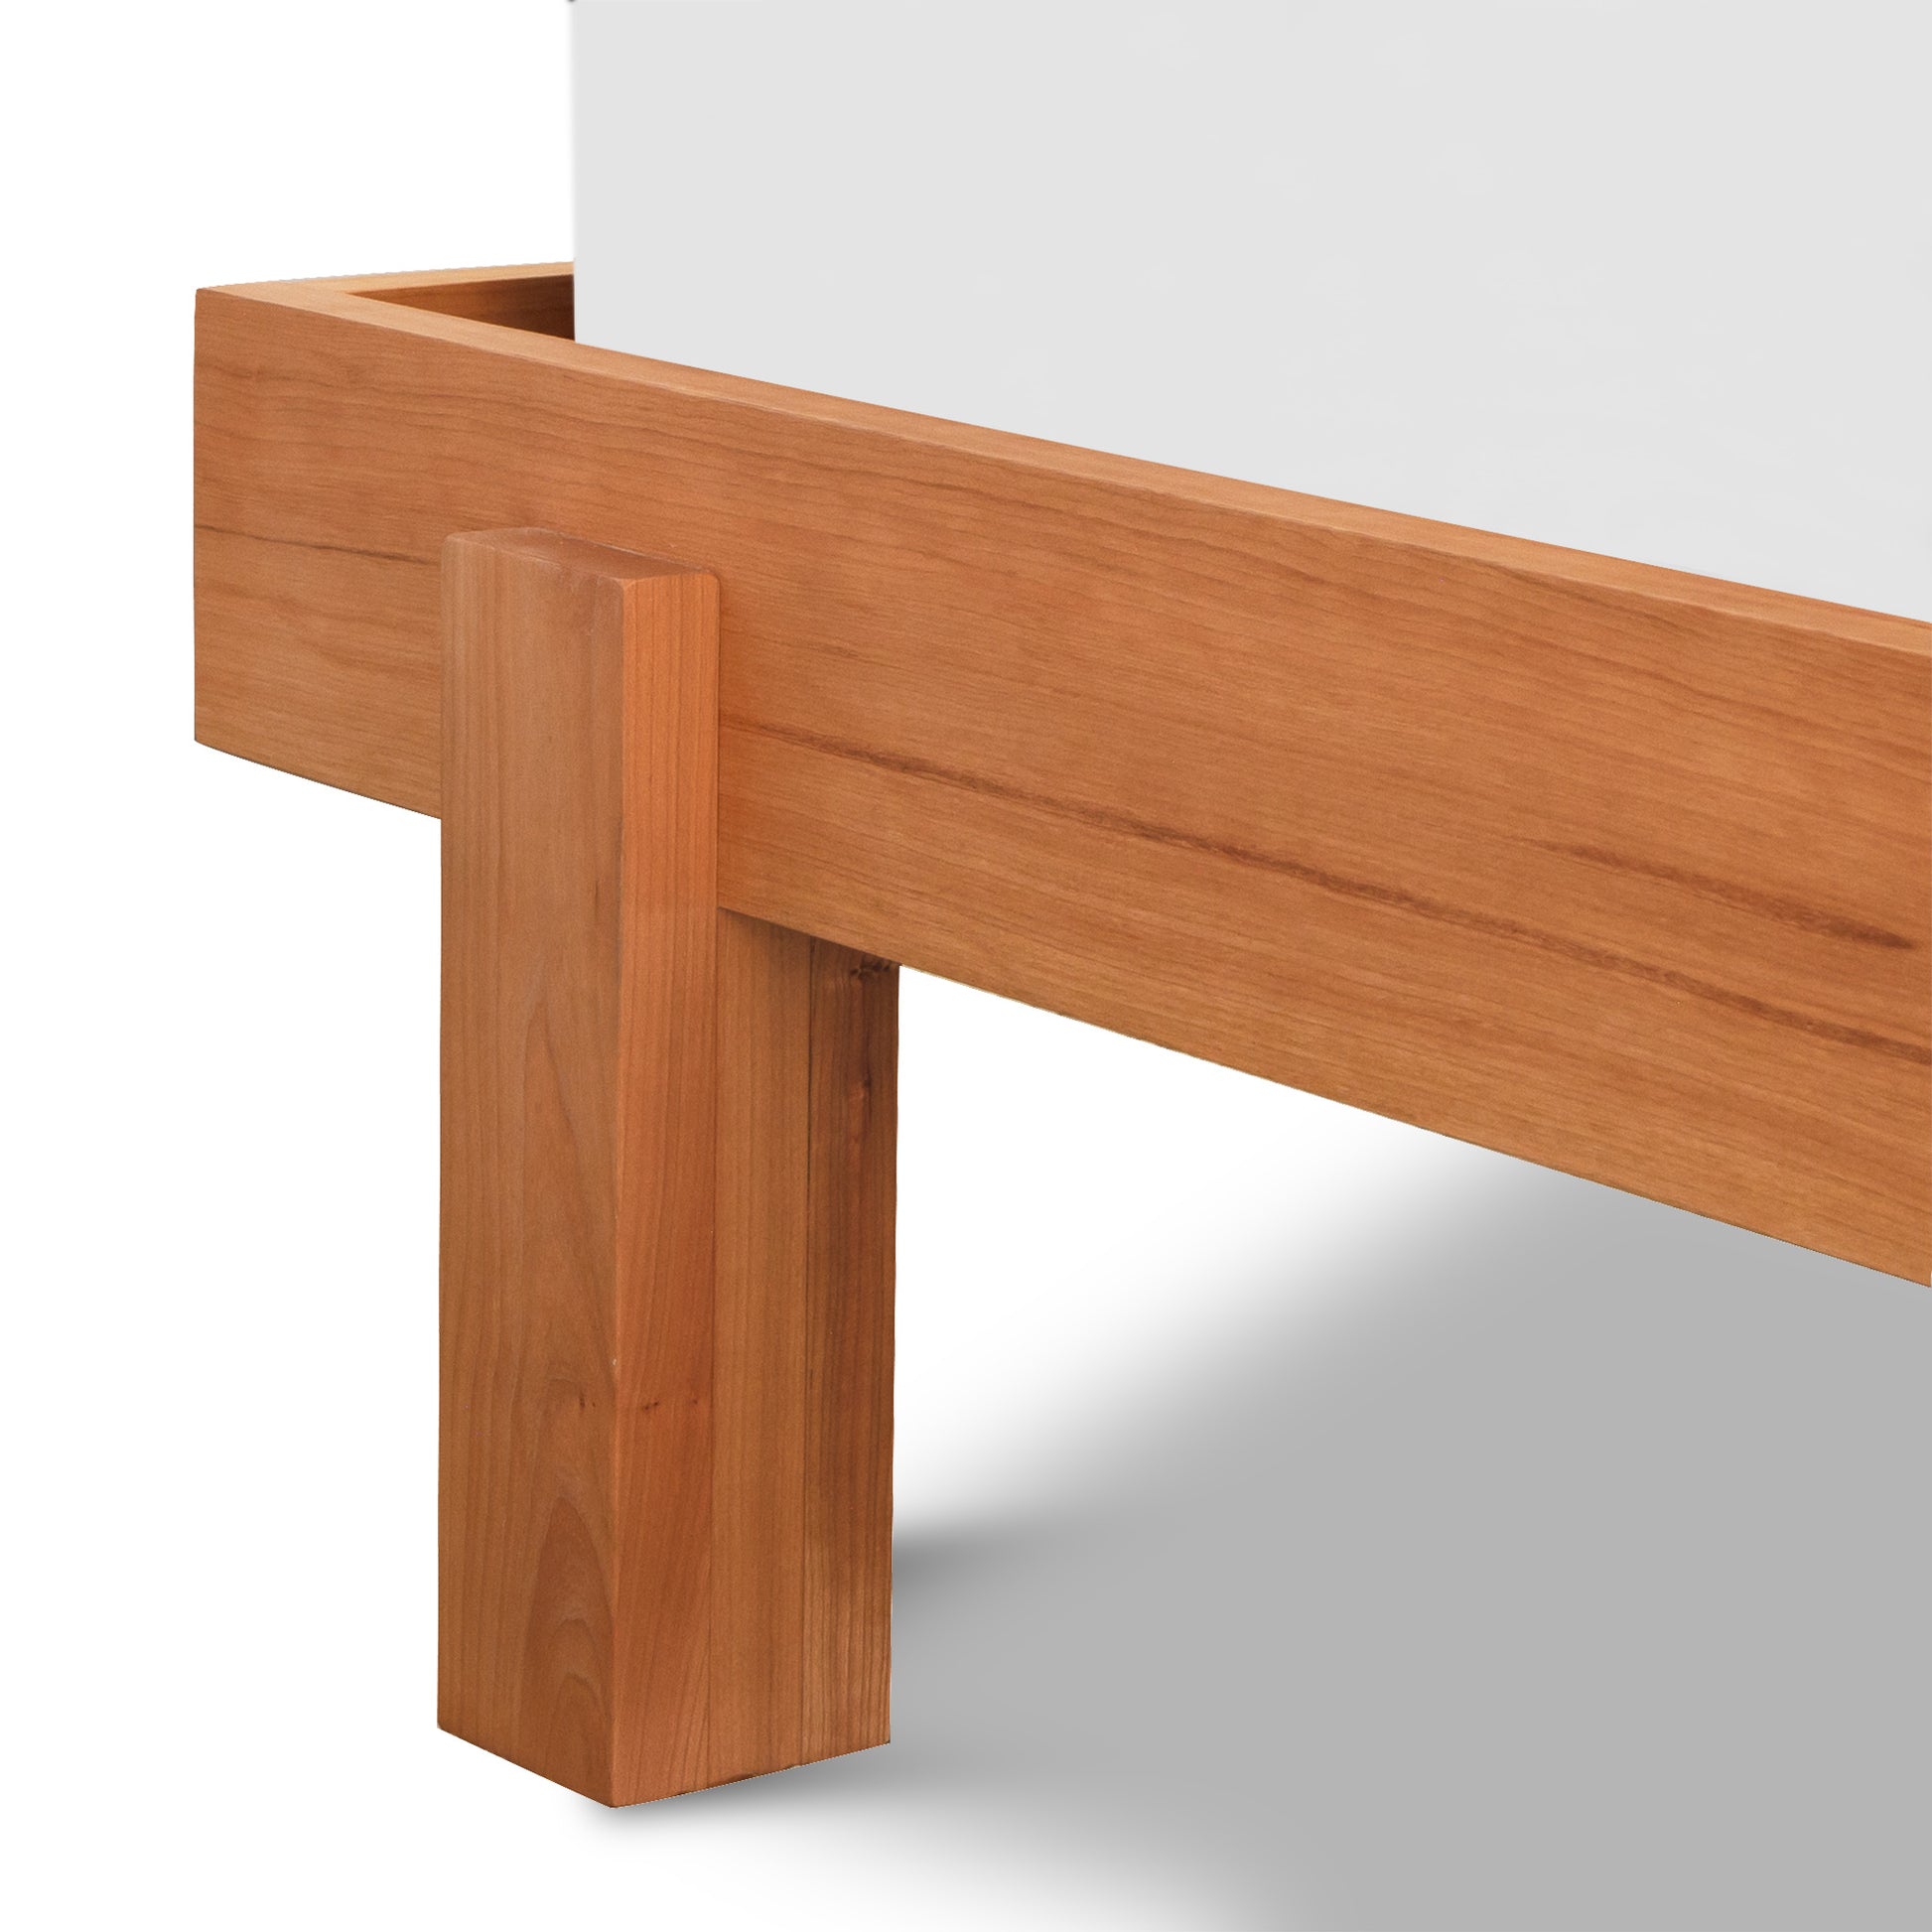 A close-up view of a Vermont Furniture Designs solid wood Kipling Bed leg connected to the tabletop, set against a white background.